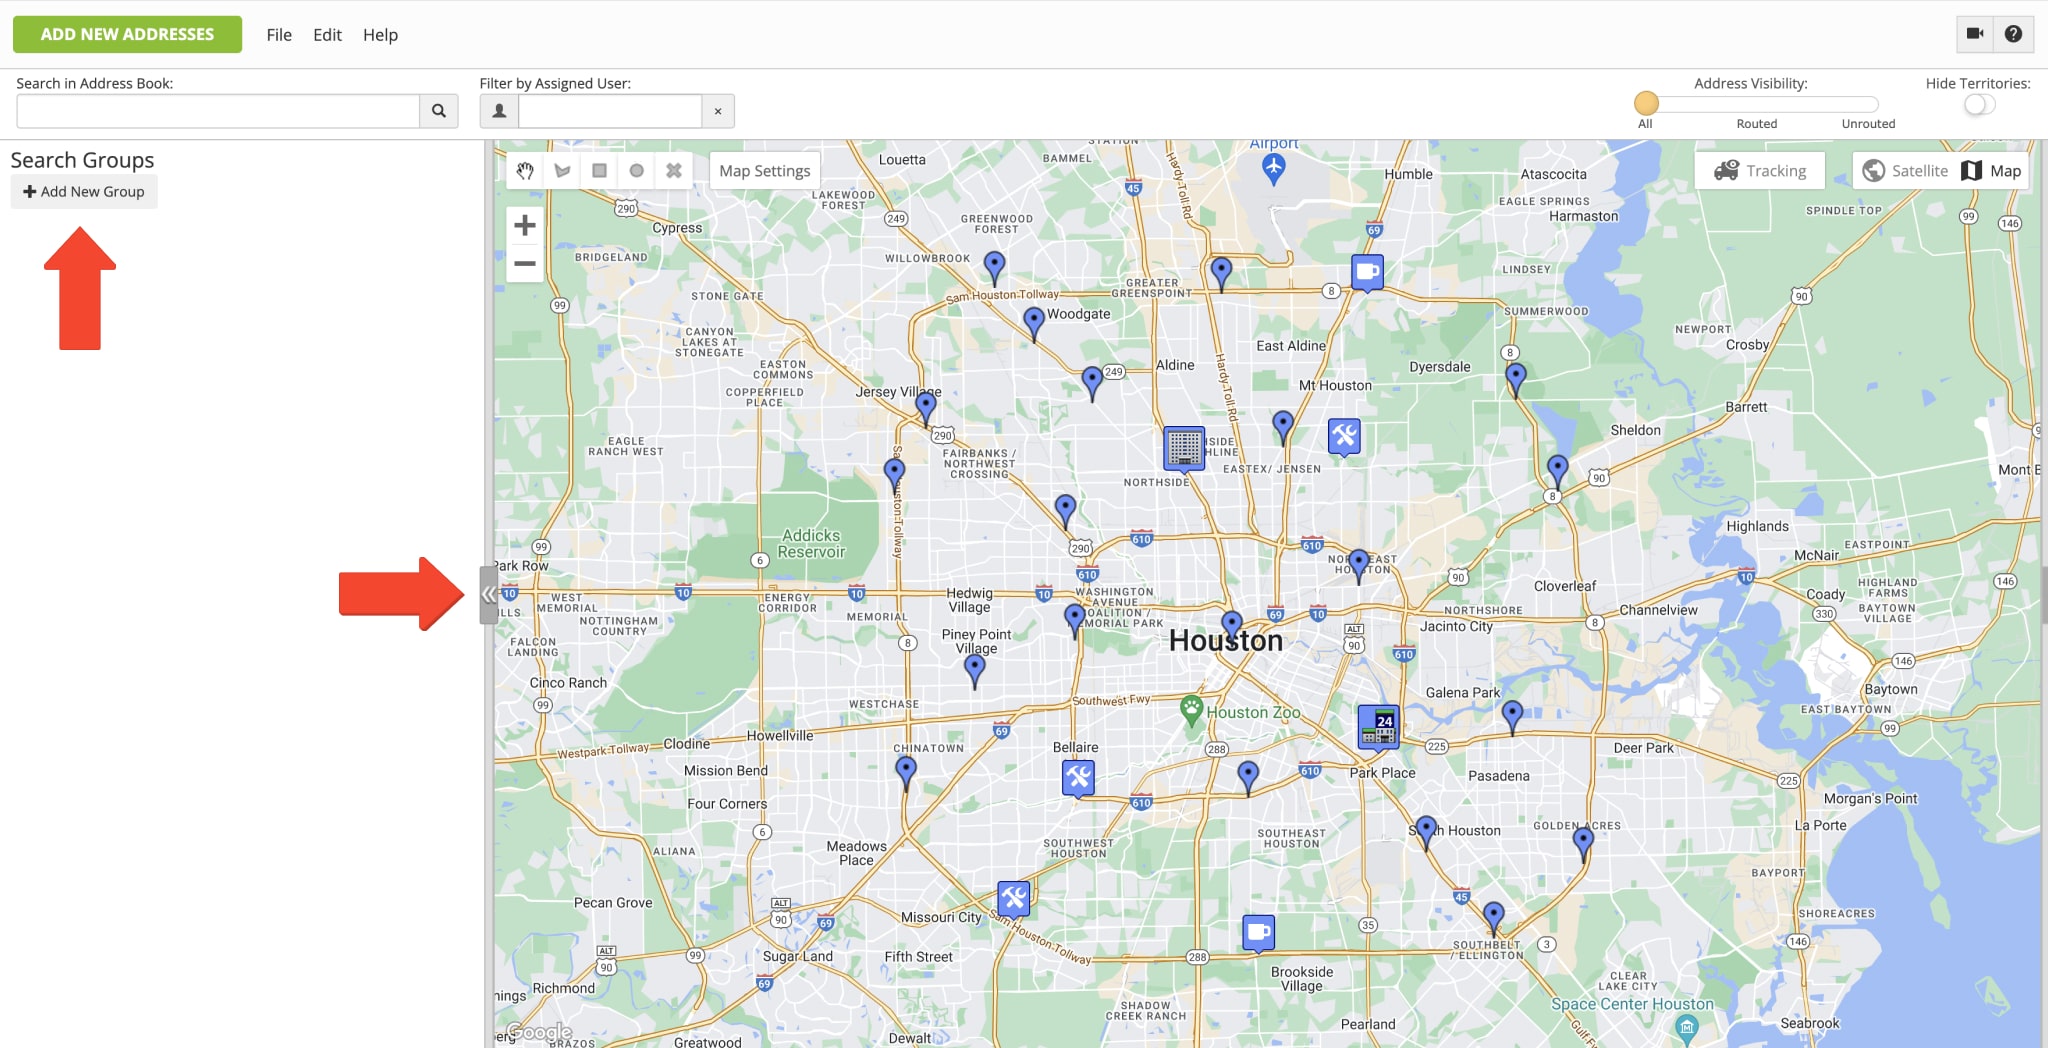 Create new Search Groups in the Address Book Map to filter addresses for last mile route planning, export, and more.